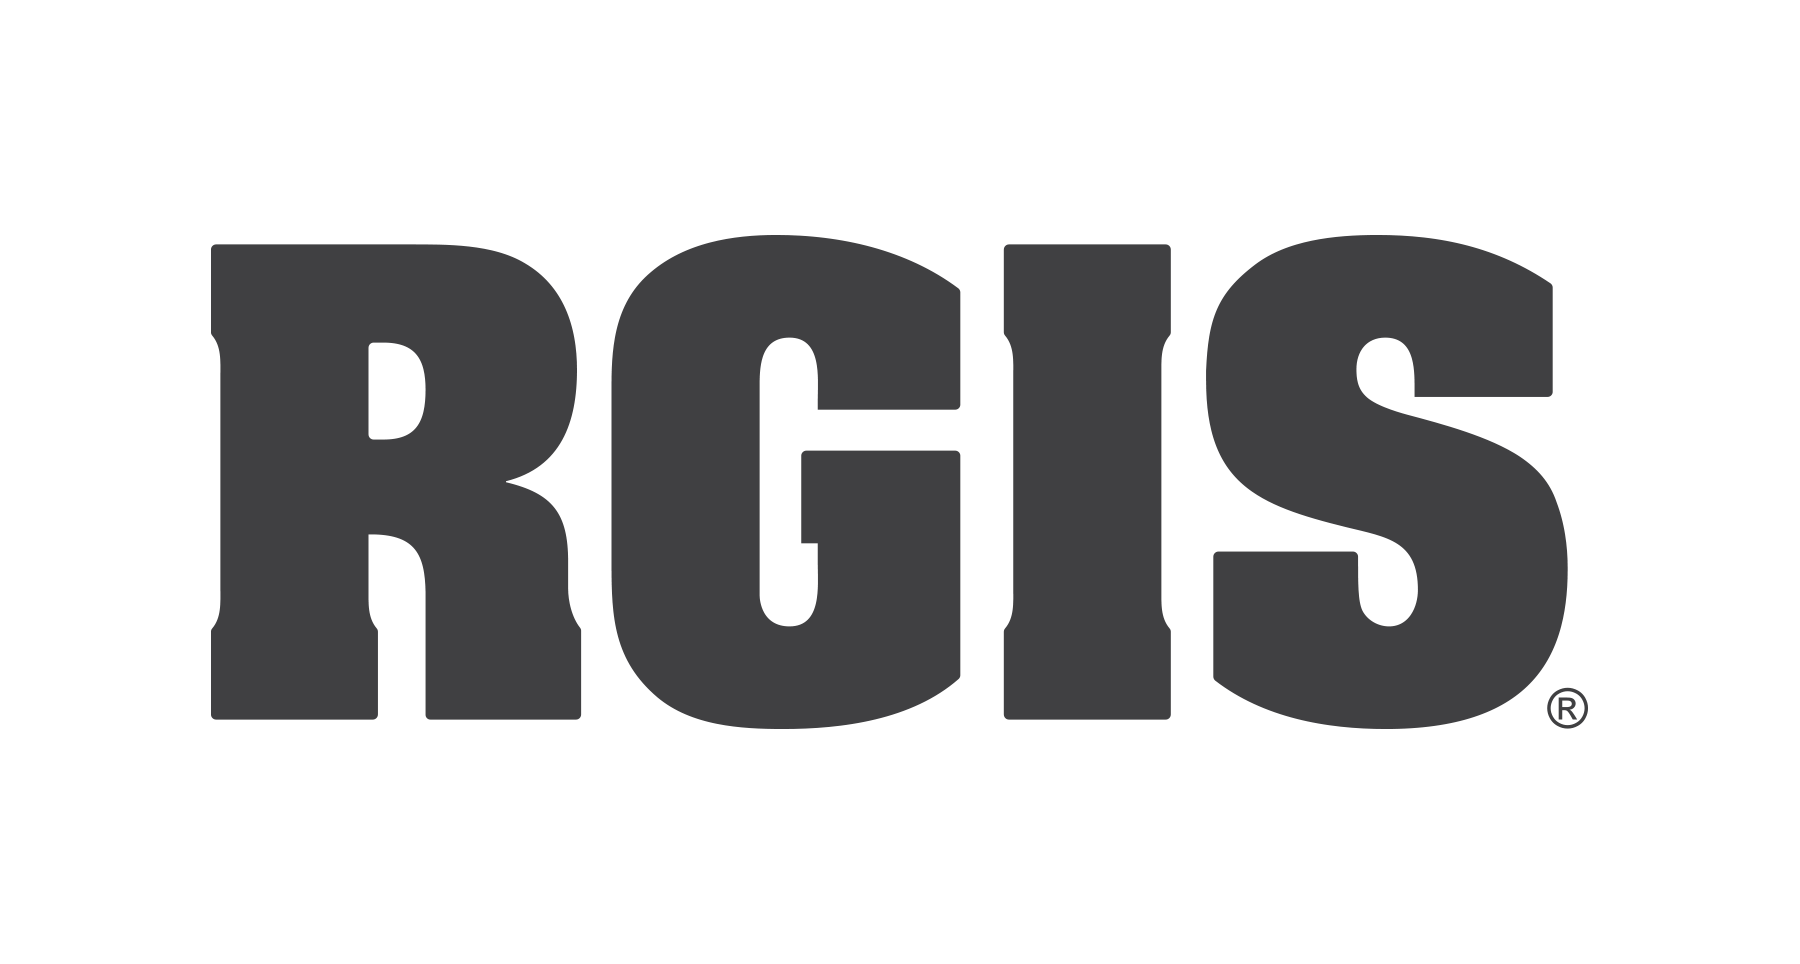 RGIS Inventory Specialists Ltd